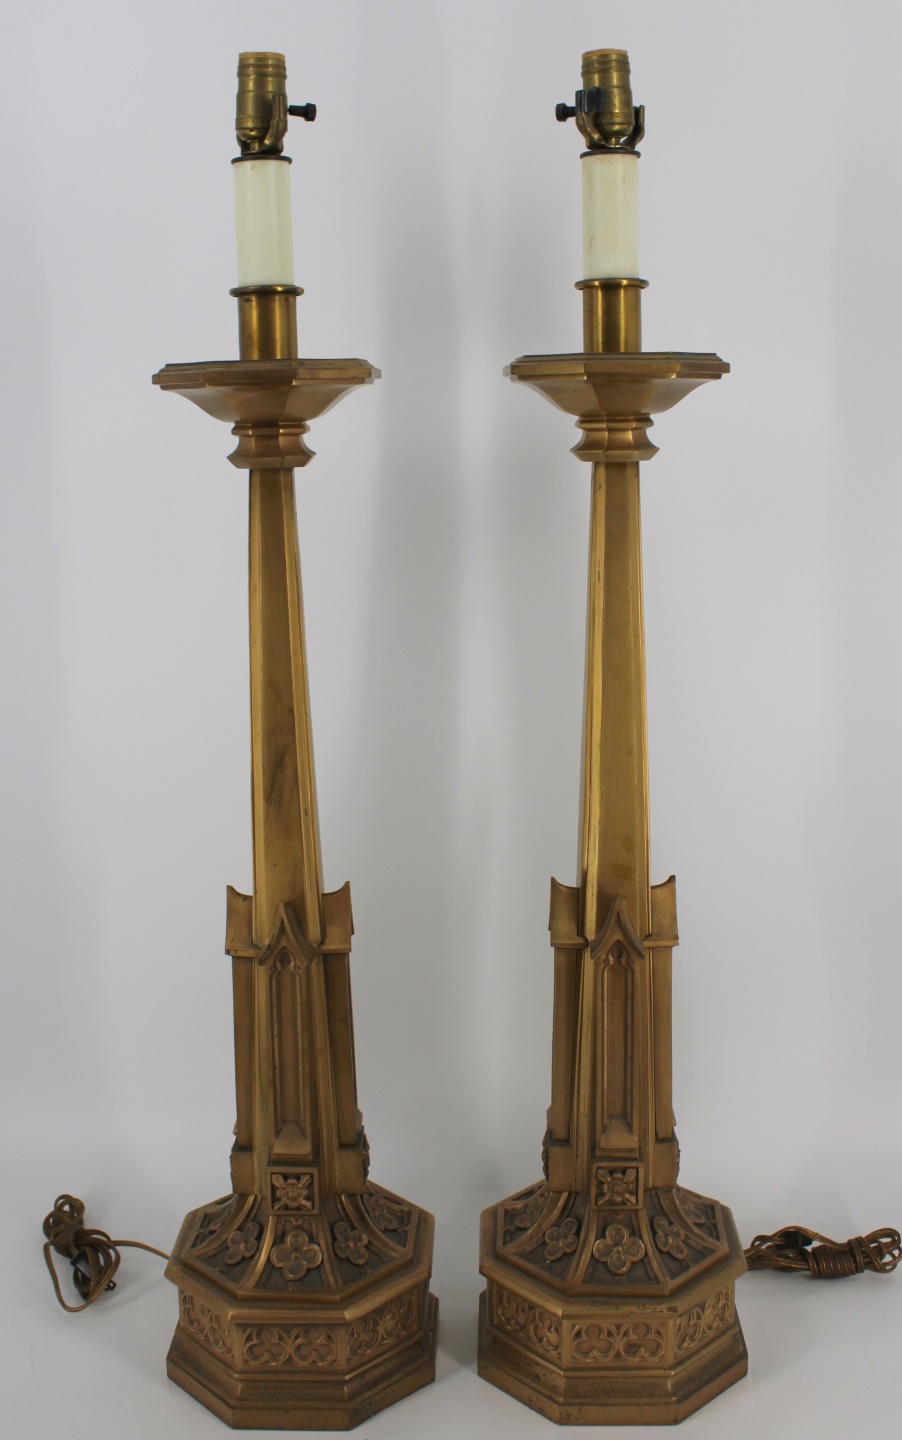 FINE AND LARGE BRONZE GOTHIC STYLE